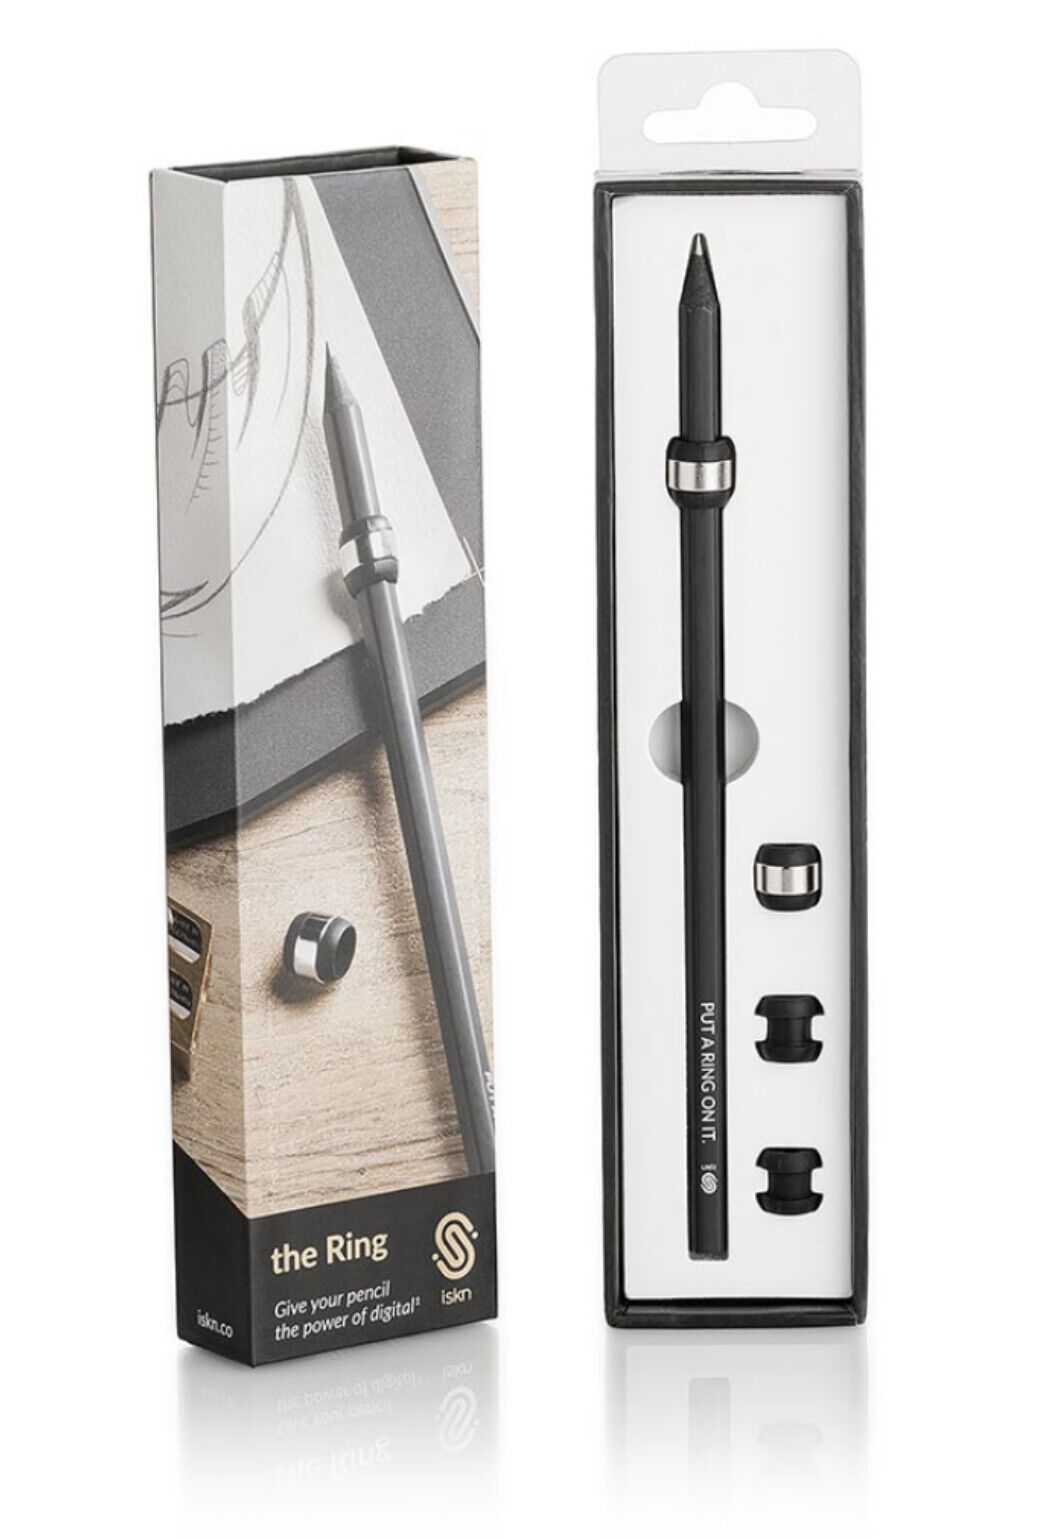 iSKn The Ring Pencil Digitizer for the Slate 2+ pen and paper to Bluetooth Pad